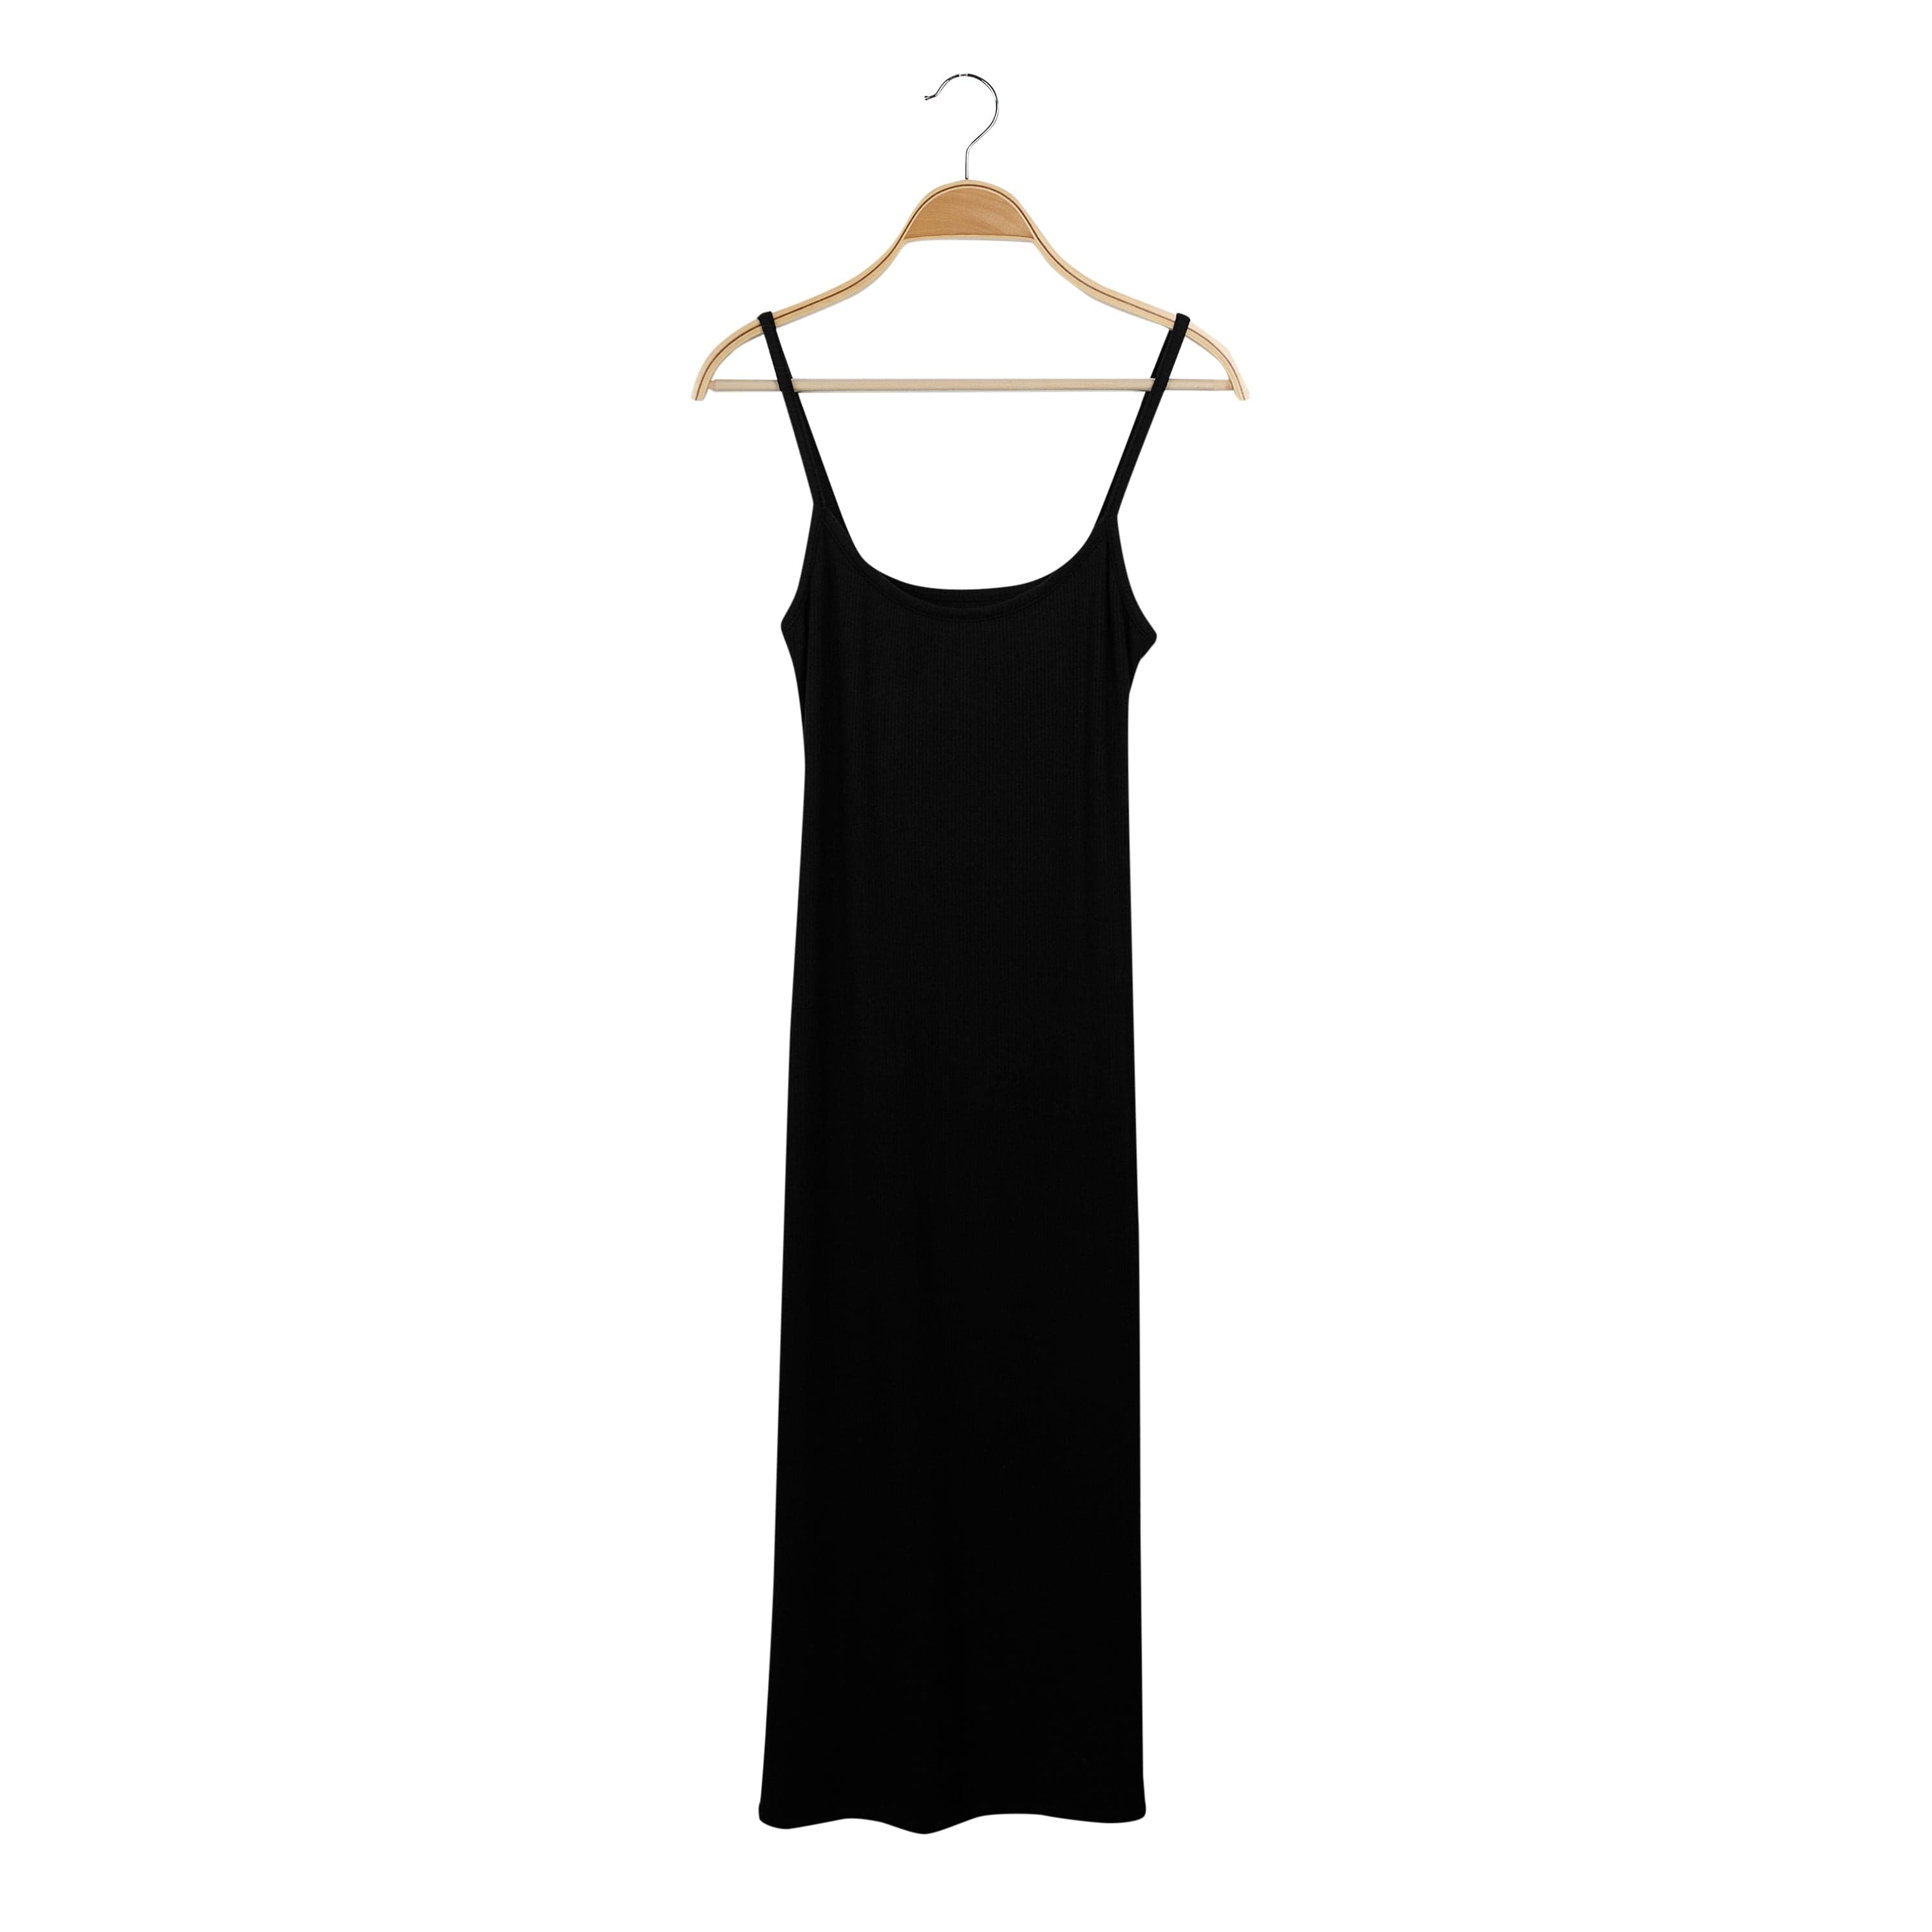 Kyte Baby Ribbed Women's Cami Dress Women's Ribbed Cami Dress in Midnight